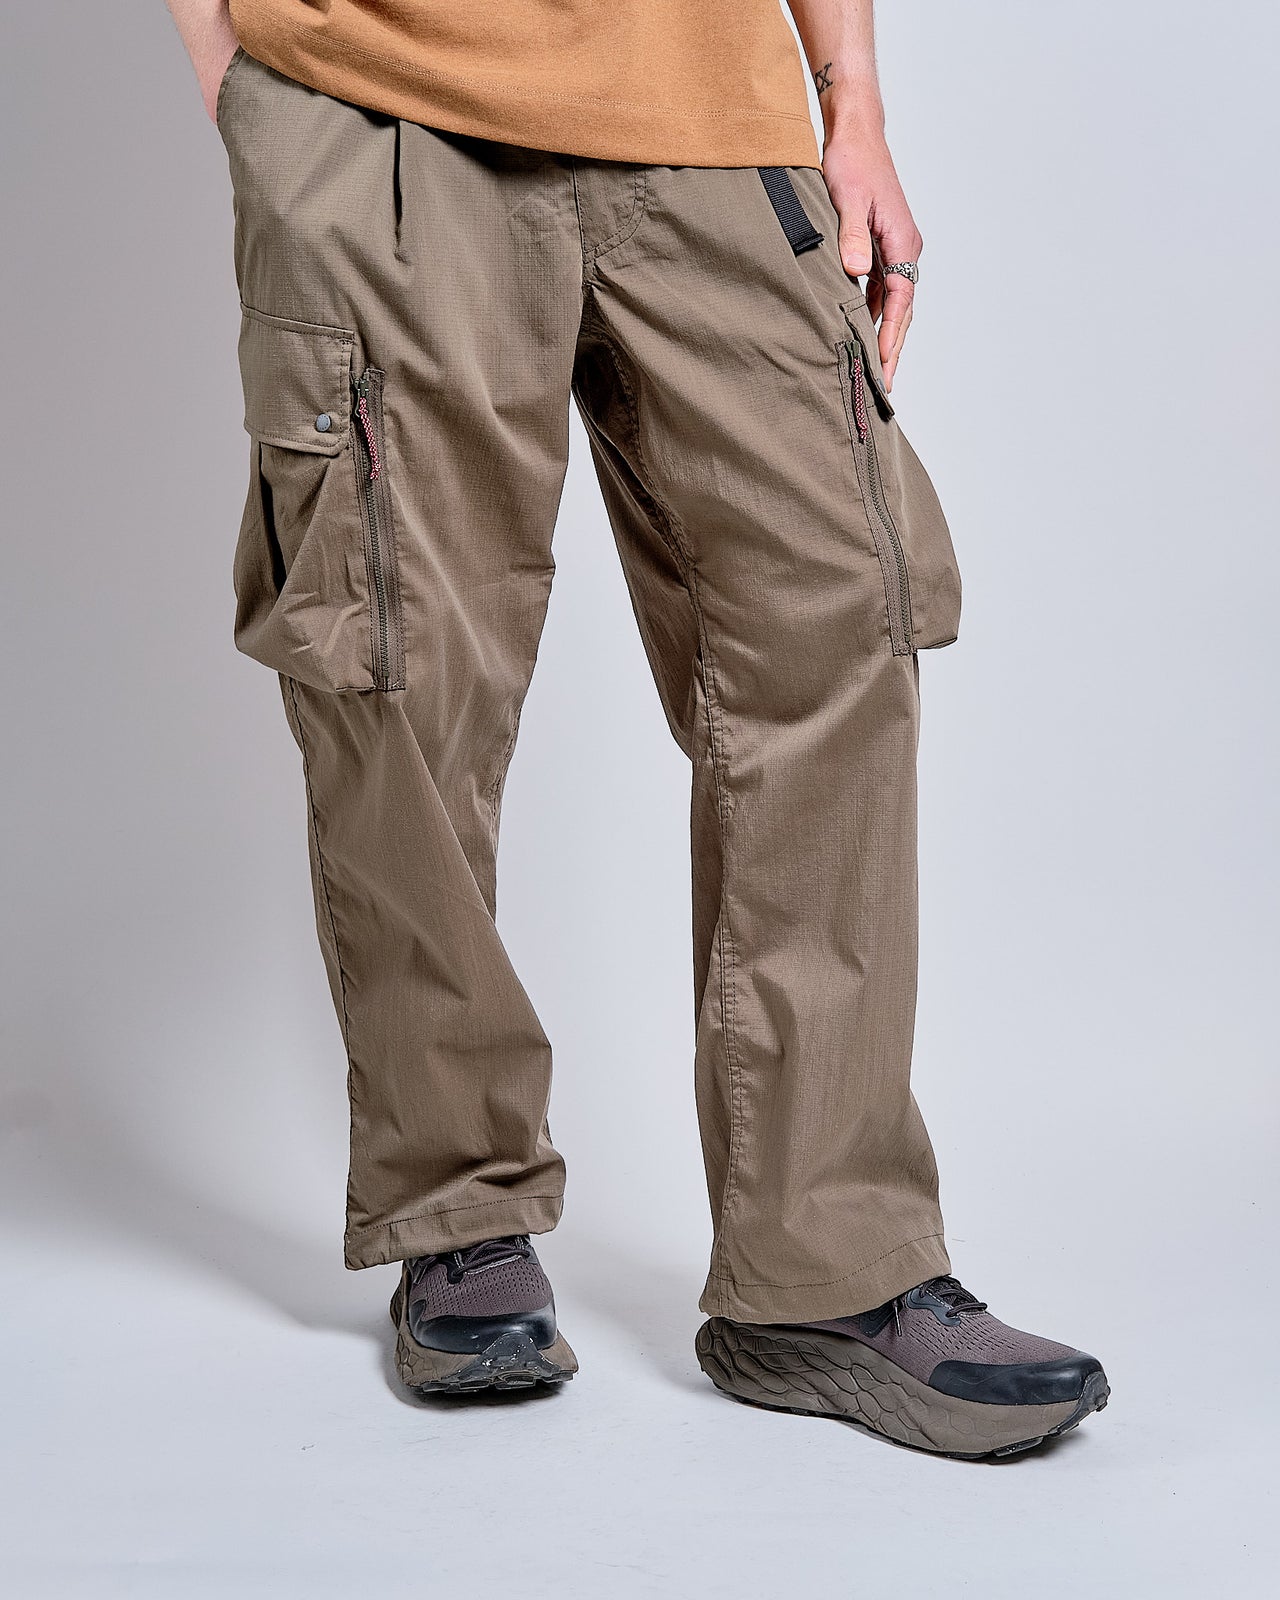 Hinoc Ripstop Field Cargo Pants in Army